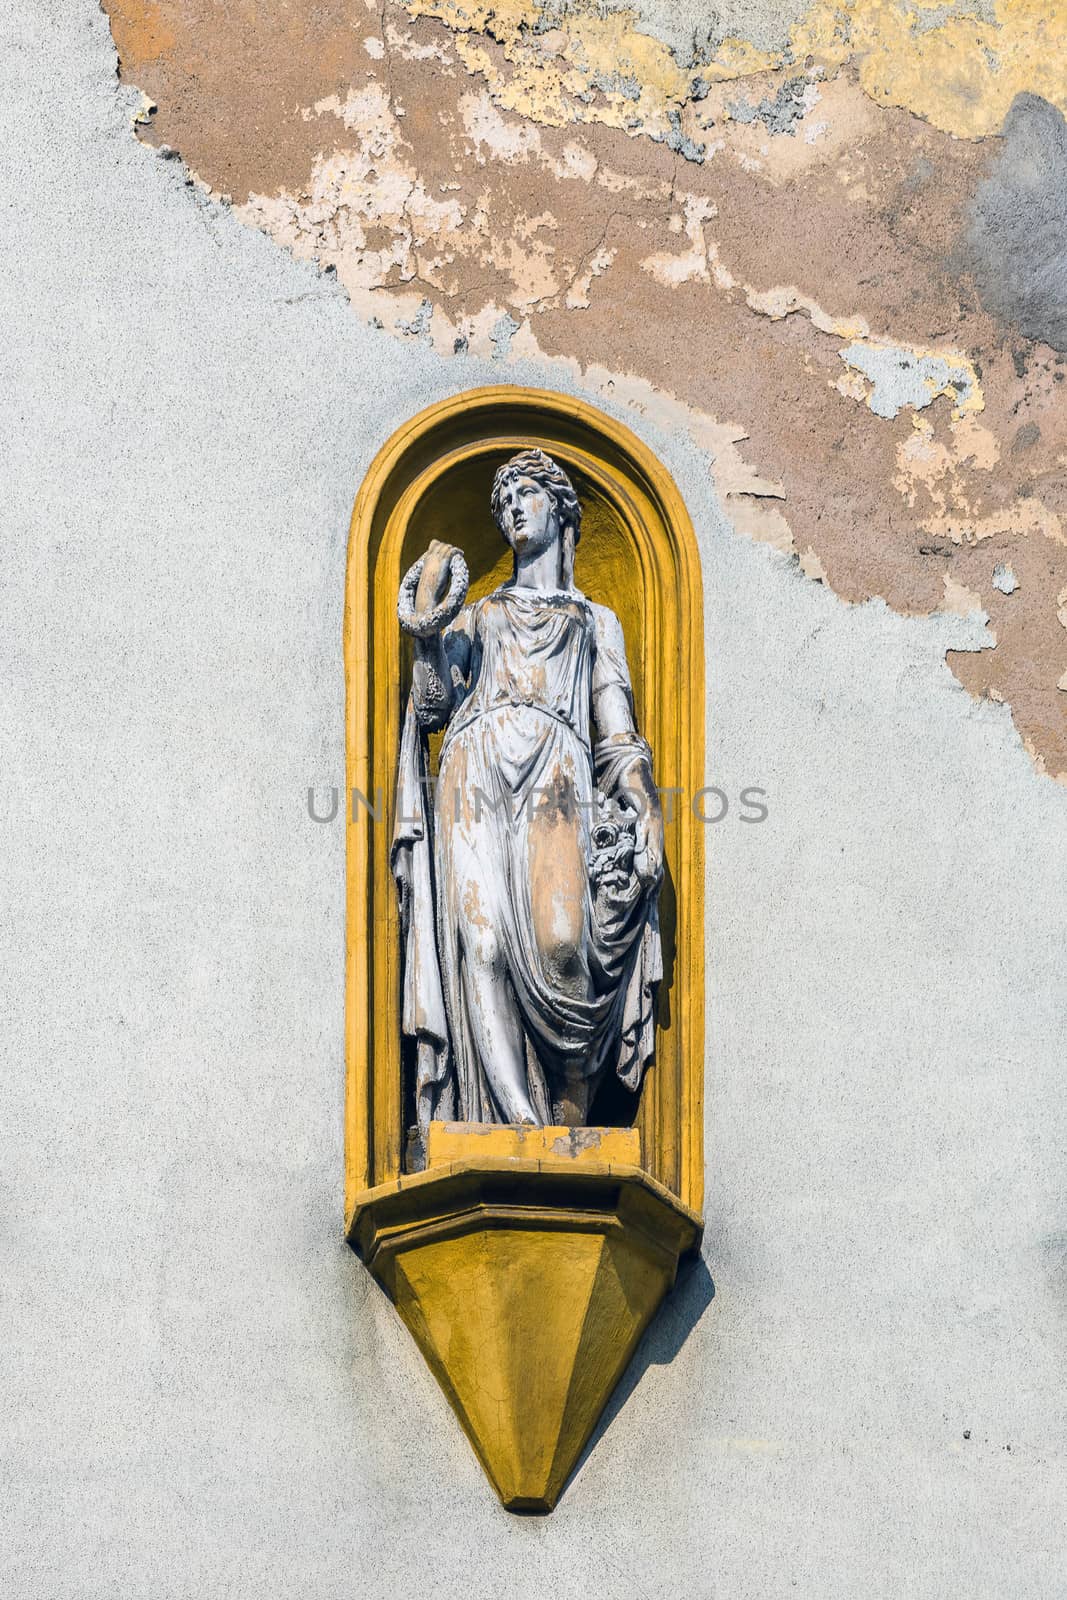 Allegorical statue on the facade of the tenement in Tarnowskie Gory, Silesia region, Poland.